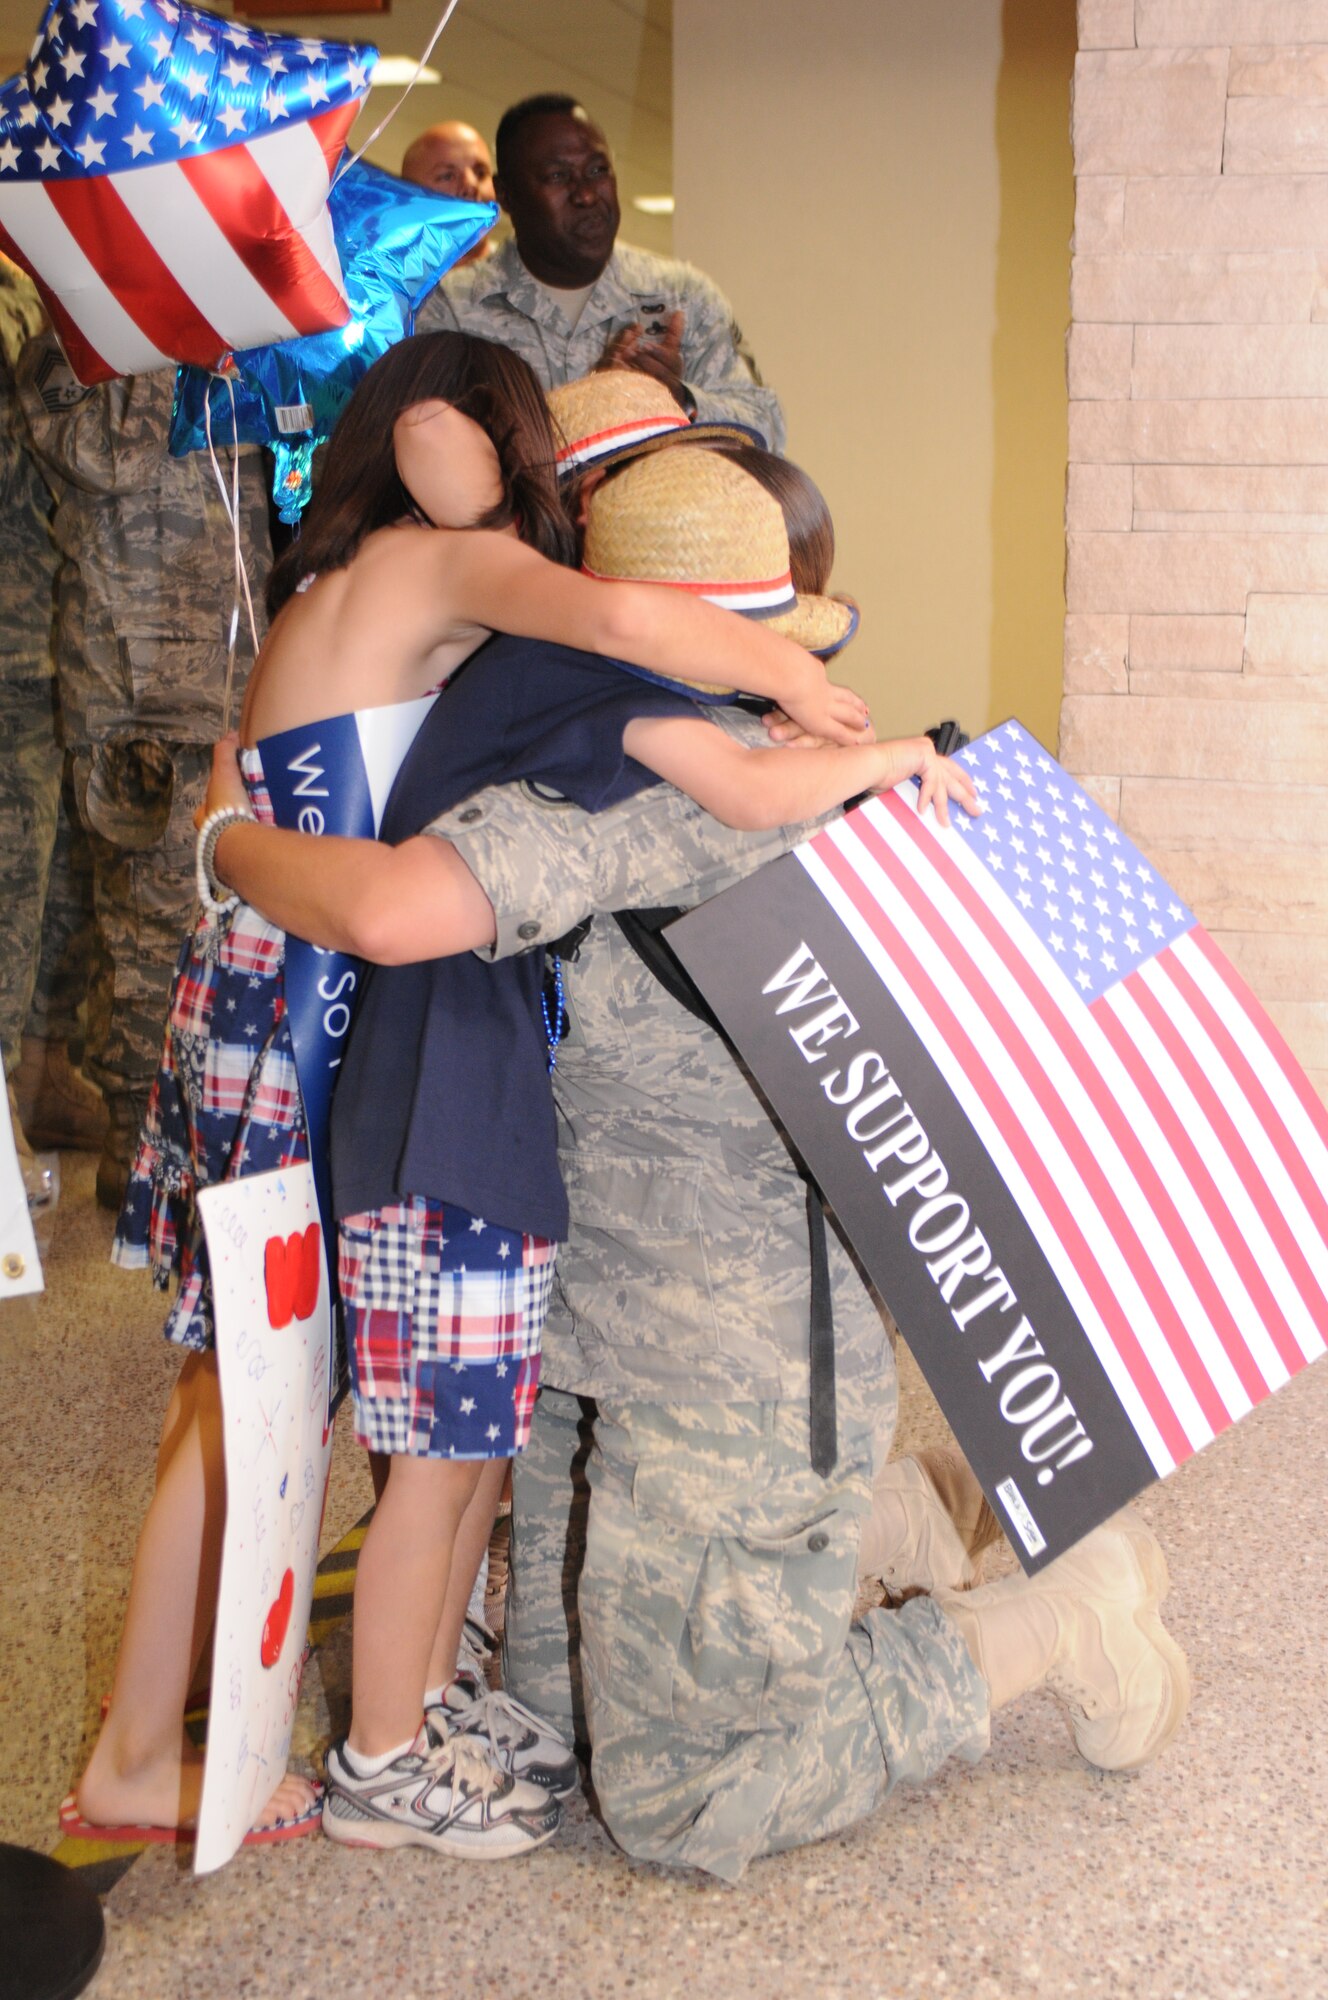 Staff Sgt. Boradel Medrano is welcomed home after a five-month deployment to Iraq, June 6. Family and friends celebrated the return of 29 security forces Airmen assigned to the 162nd Fighter Wing at Tucson International Airport. (Air Force photo by Maj. Gabe Johnson)